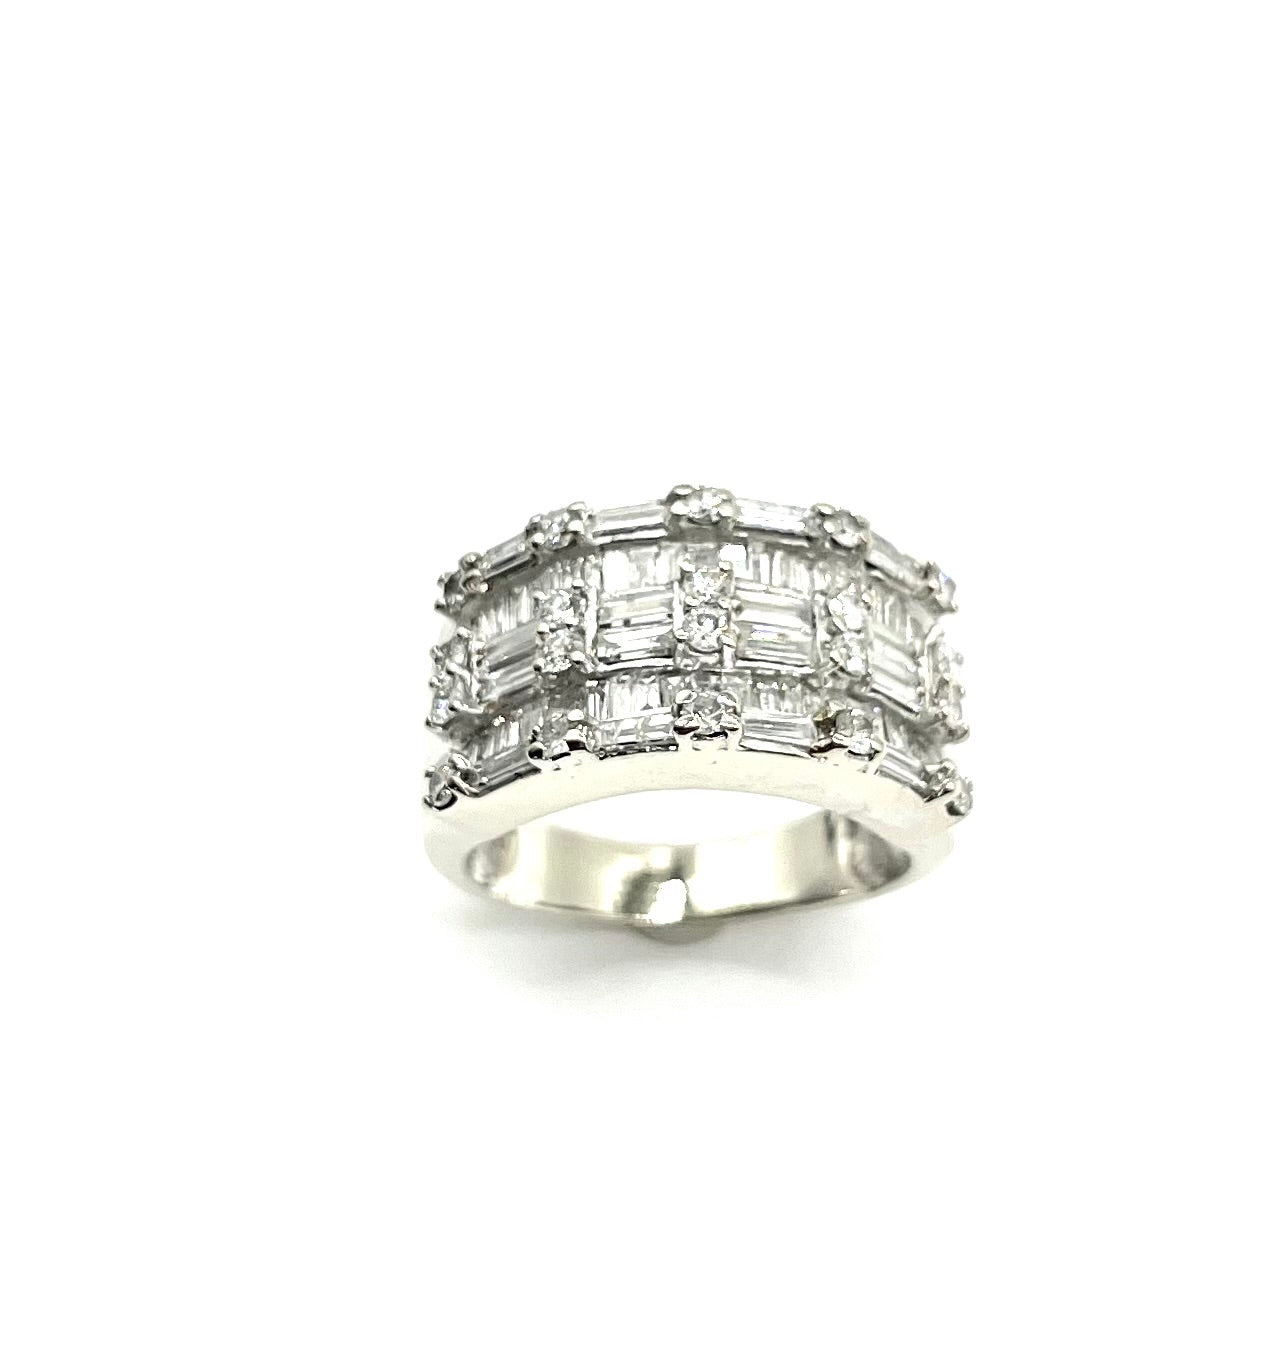 Wide White Gold 1.50ctw Round and Baguette Cut Diamond Band